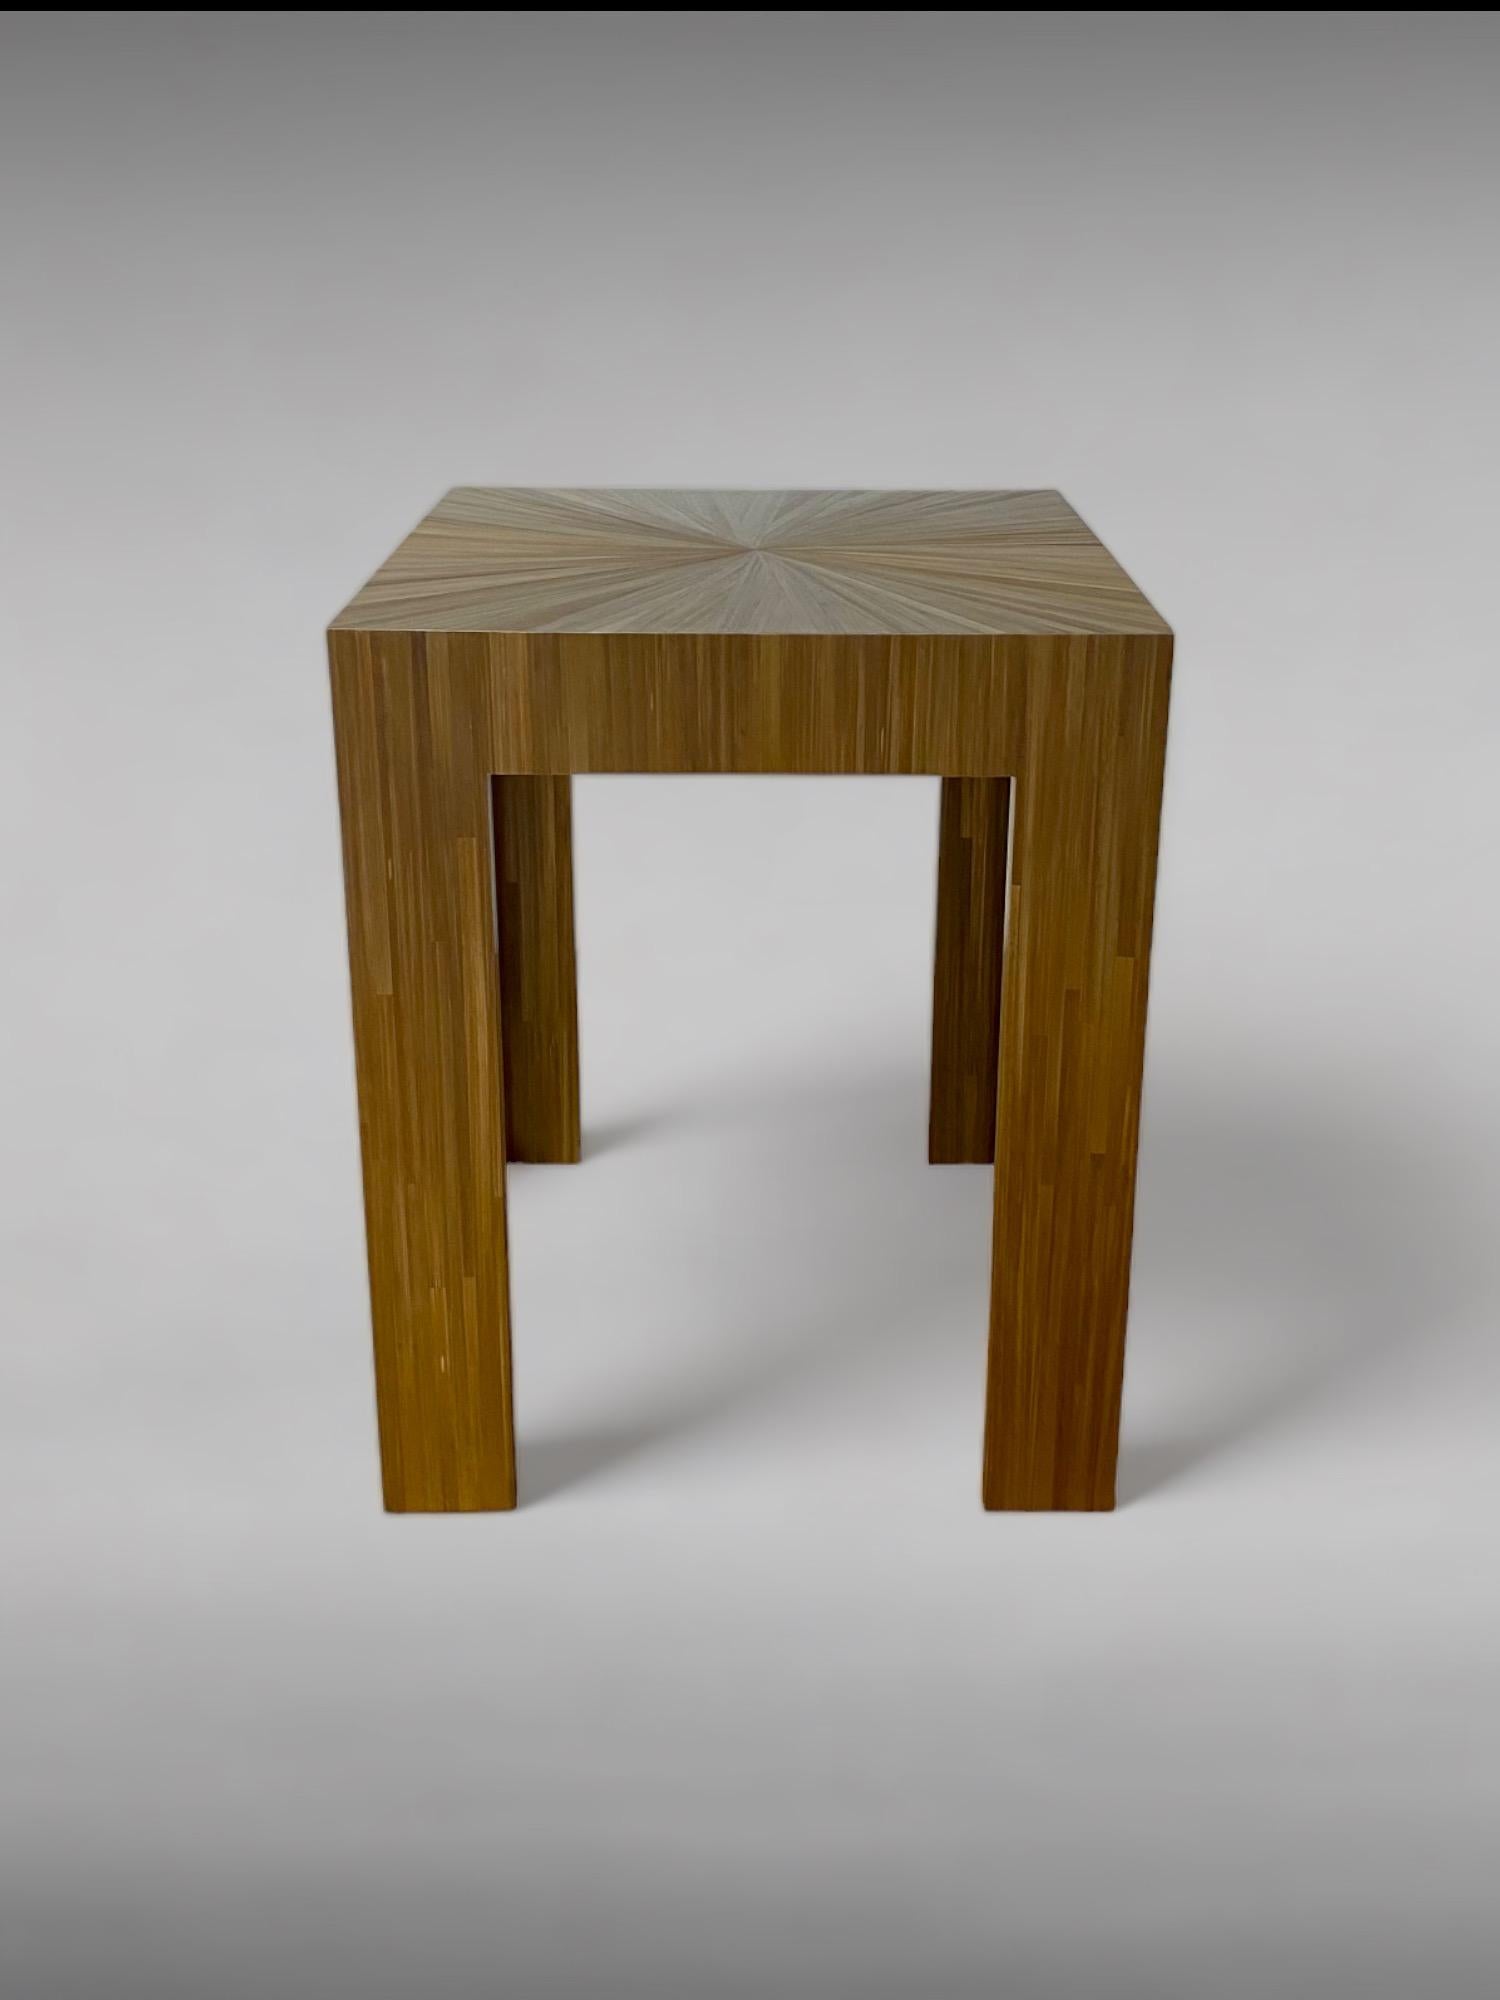 Jean-Michel Frank designs are prized for their serene and simple beauty. Available in more than 60 colors in straw marquetry motif, this striking side table showcases the nuanced hues and textures achieved through Frank’s precision in technique and